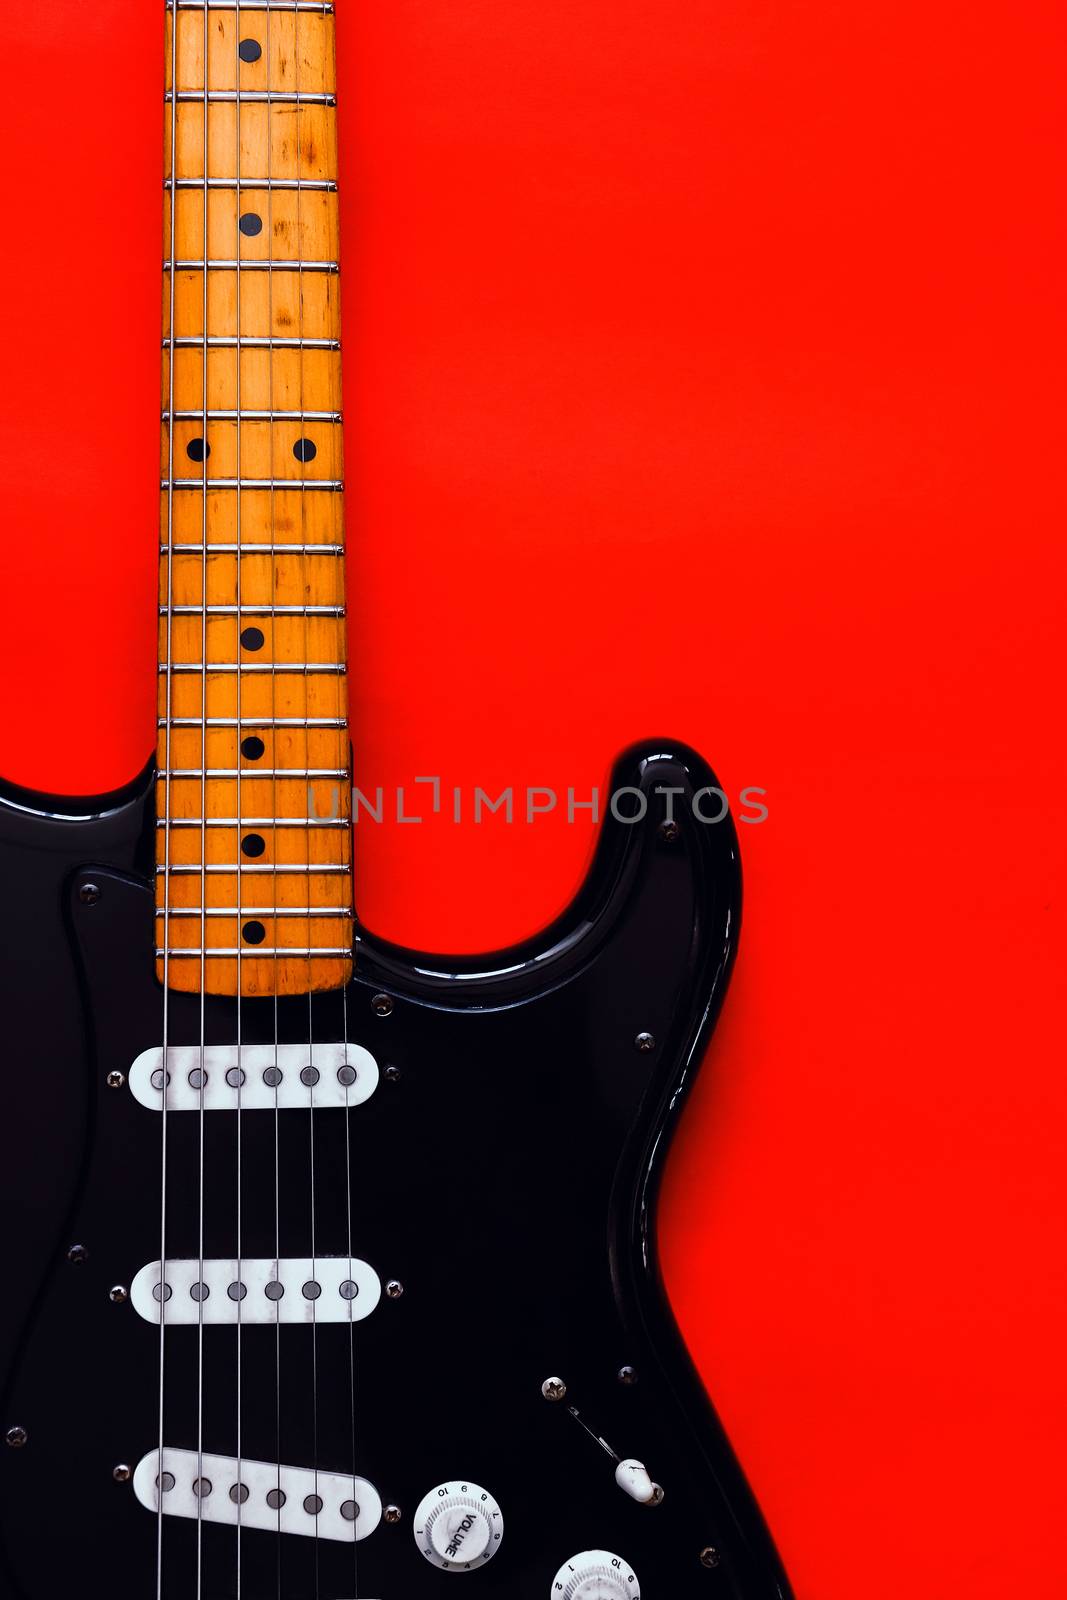 Detail of Electric Guitar on a red background.